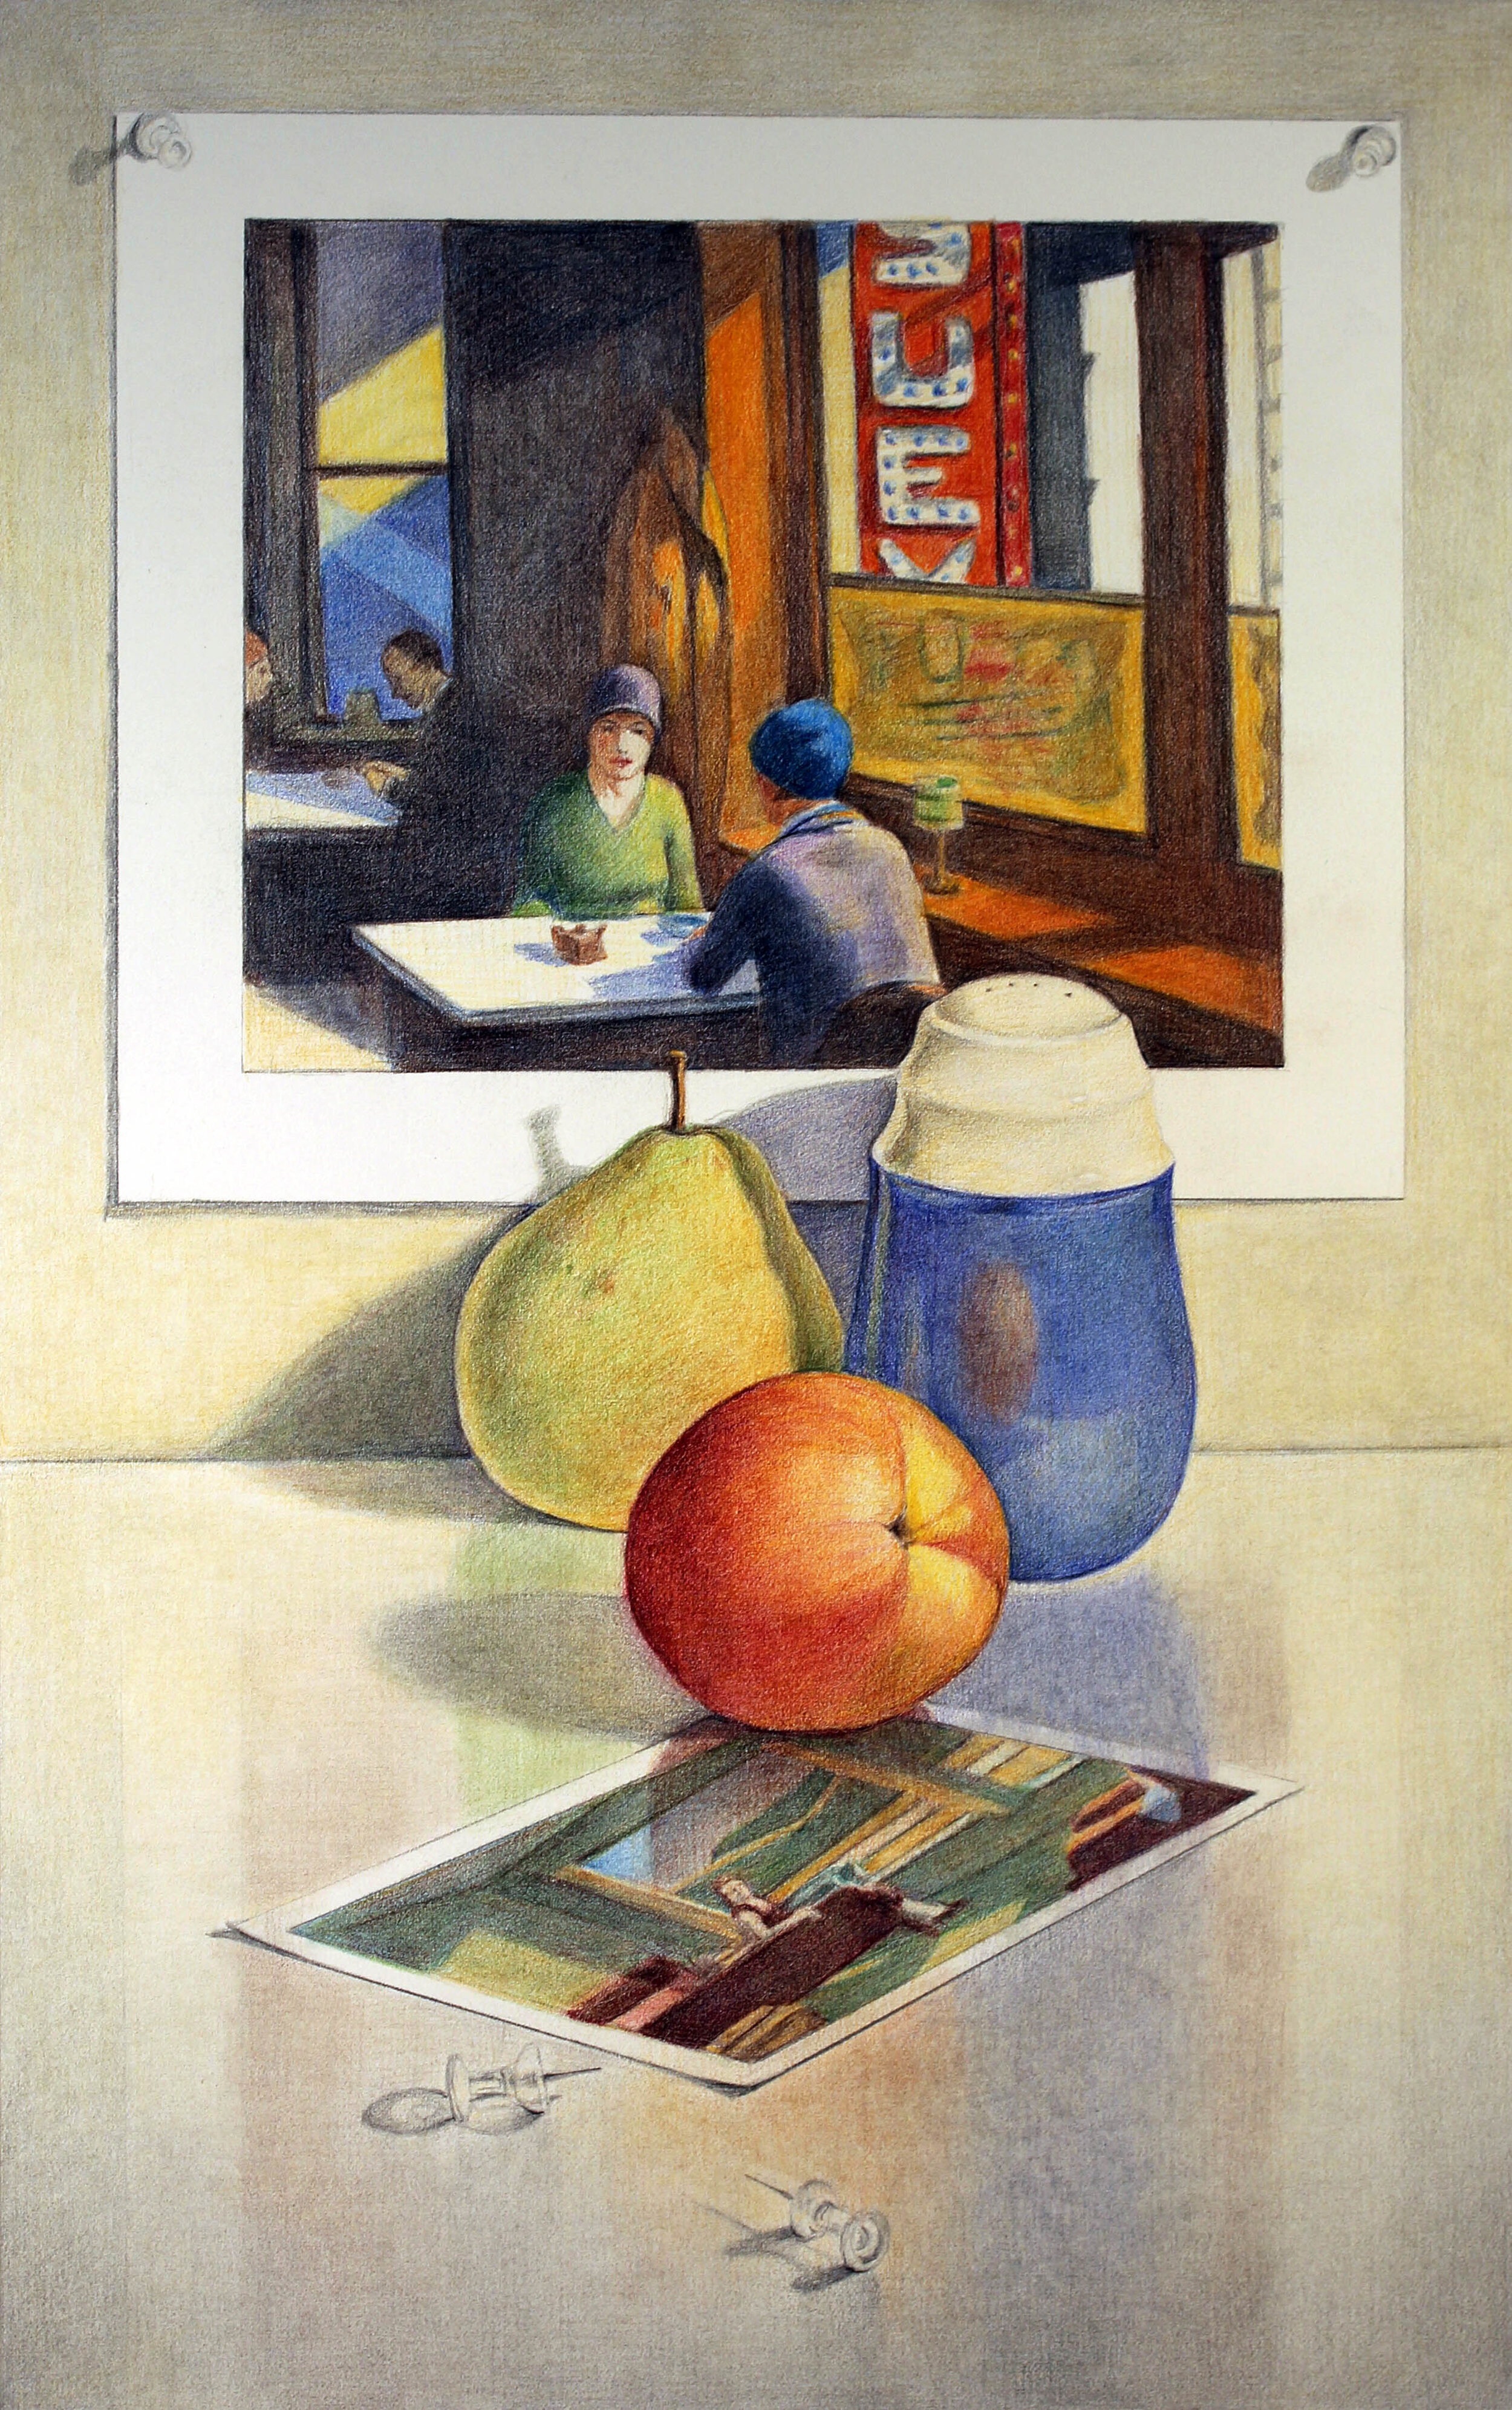 Shaker and Fruit with Hopper